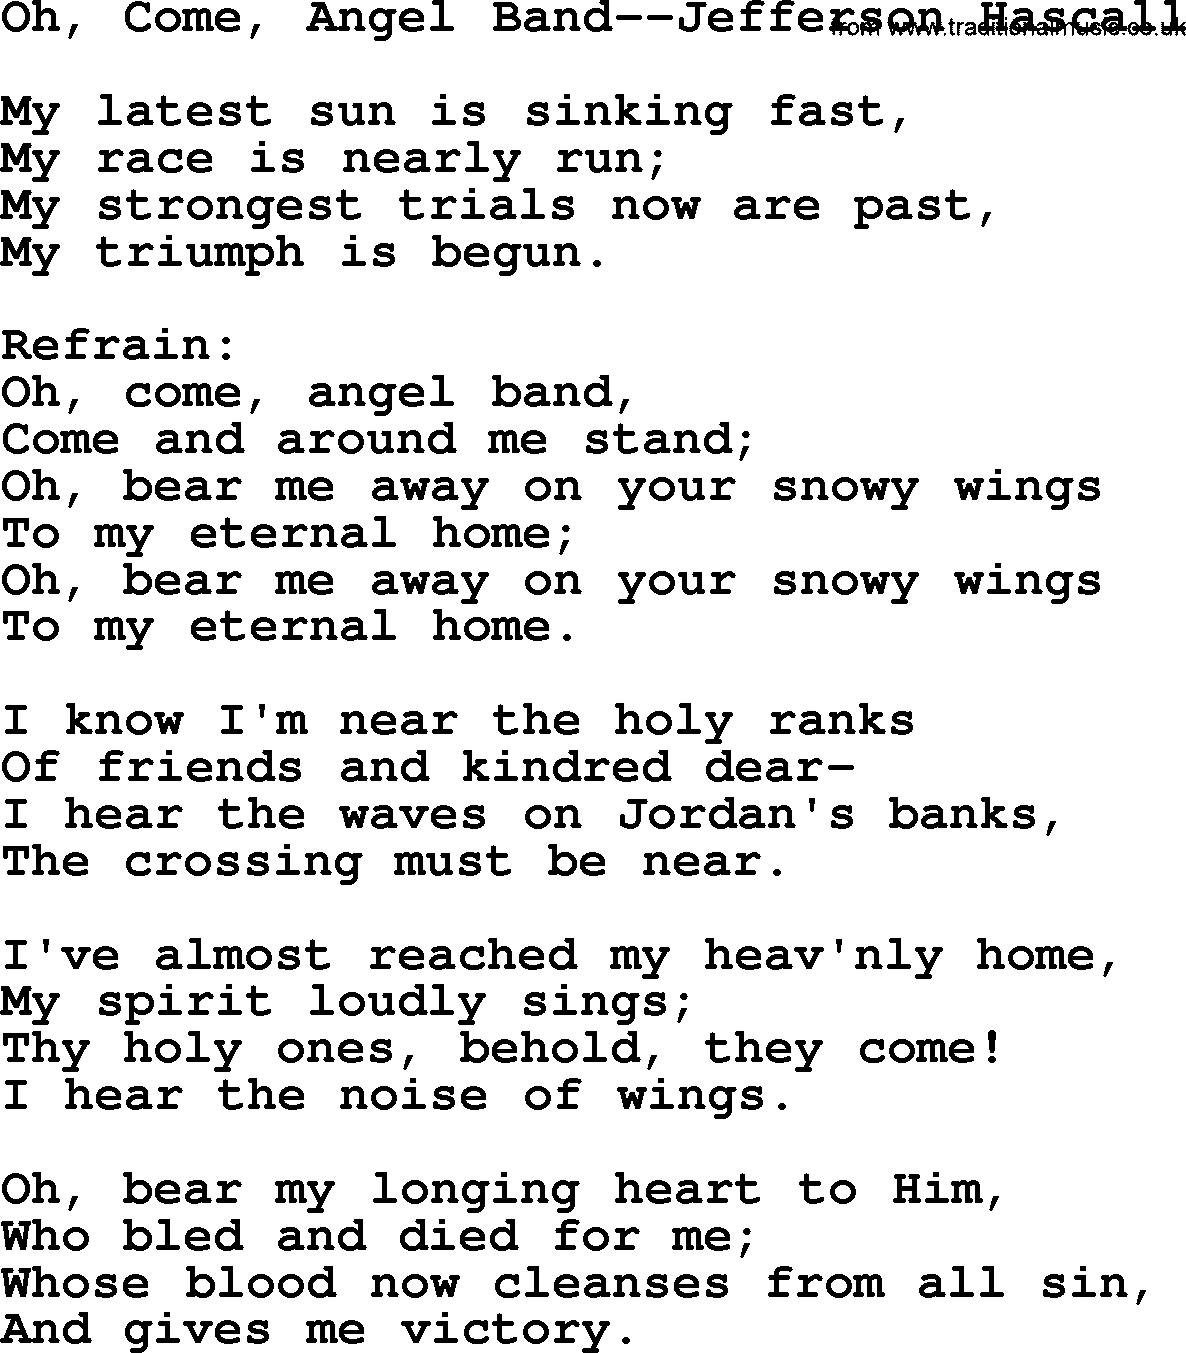 Hymns about Angels, Hymn: Oh, Come, Angel Band--jefferson Hascall.txt lyrics with PDF